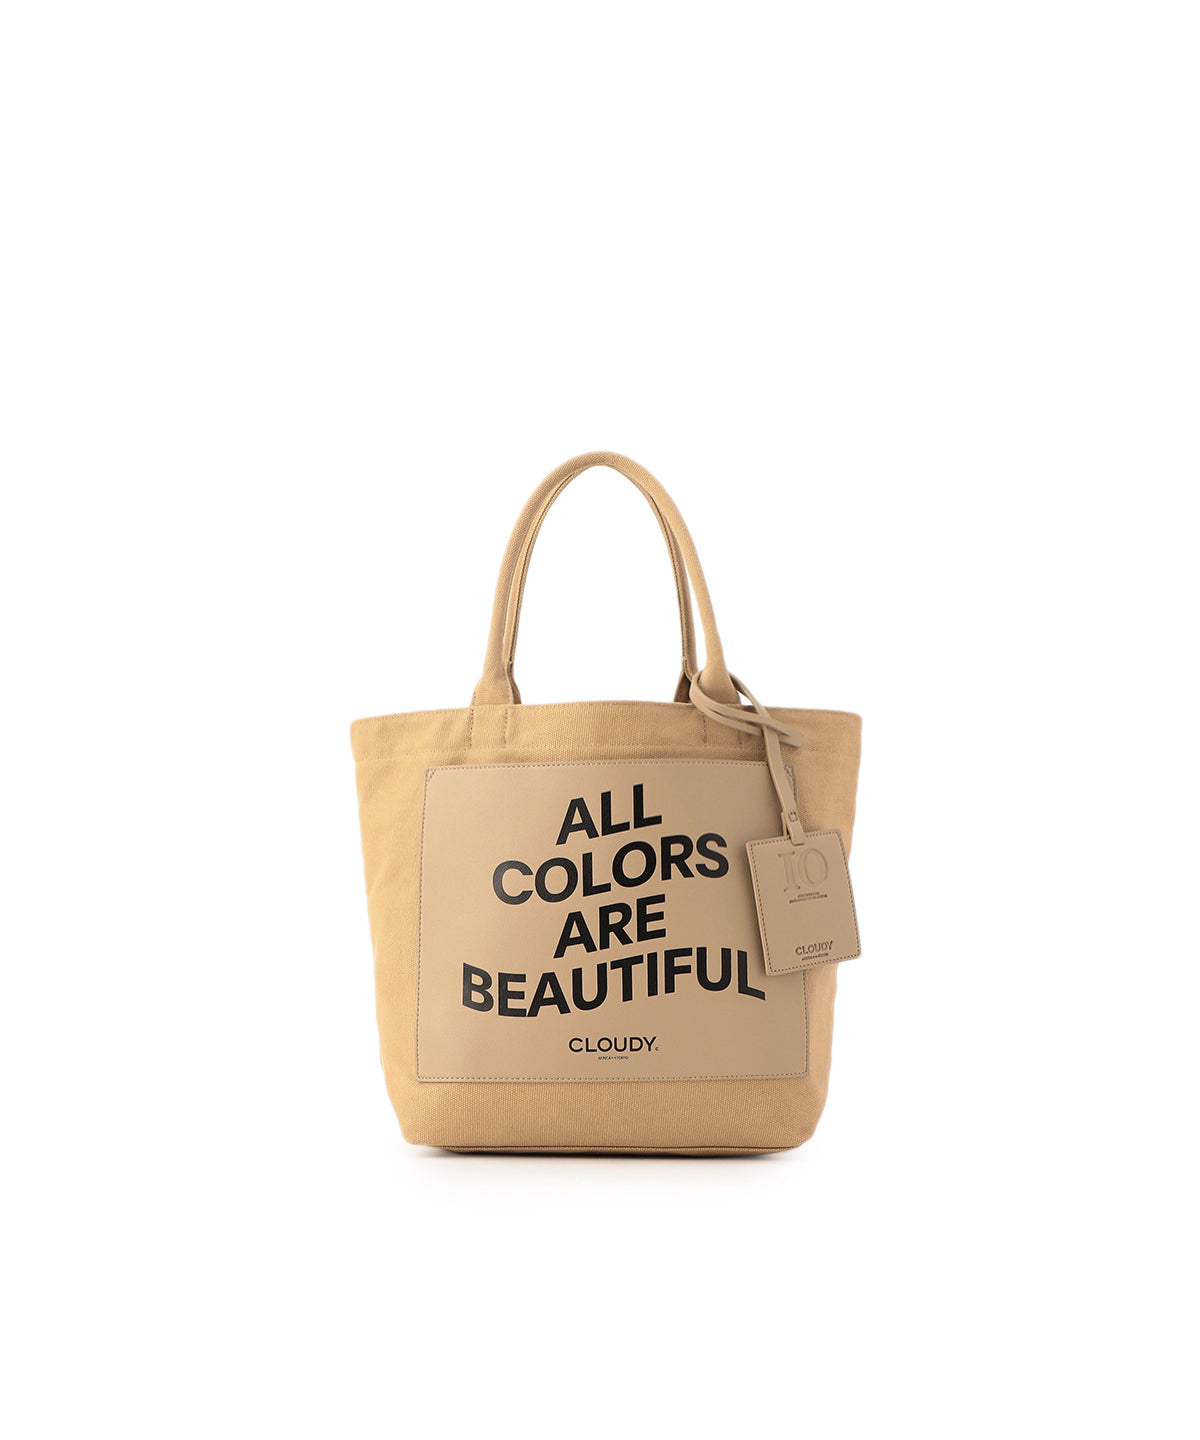 Colored Canvas Tote (Medium) L.GRAY | バッグ | CLOUDY公式通販サイト